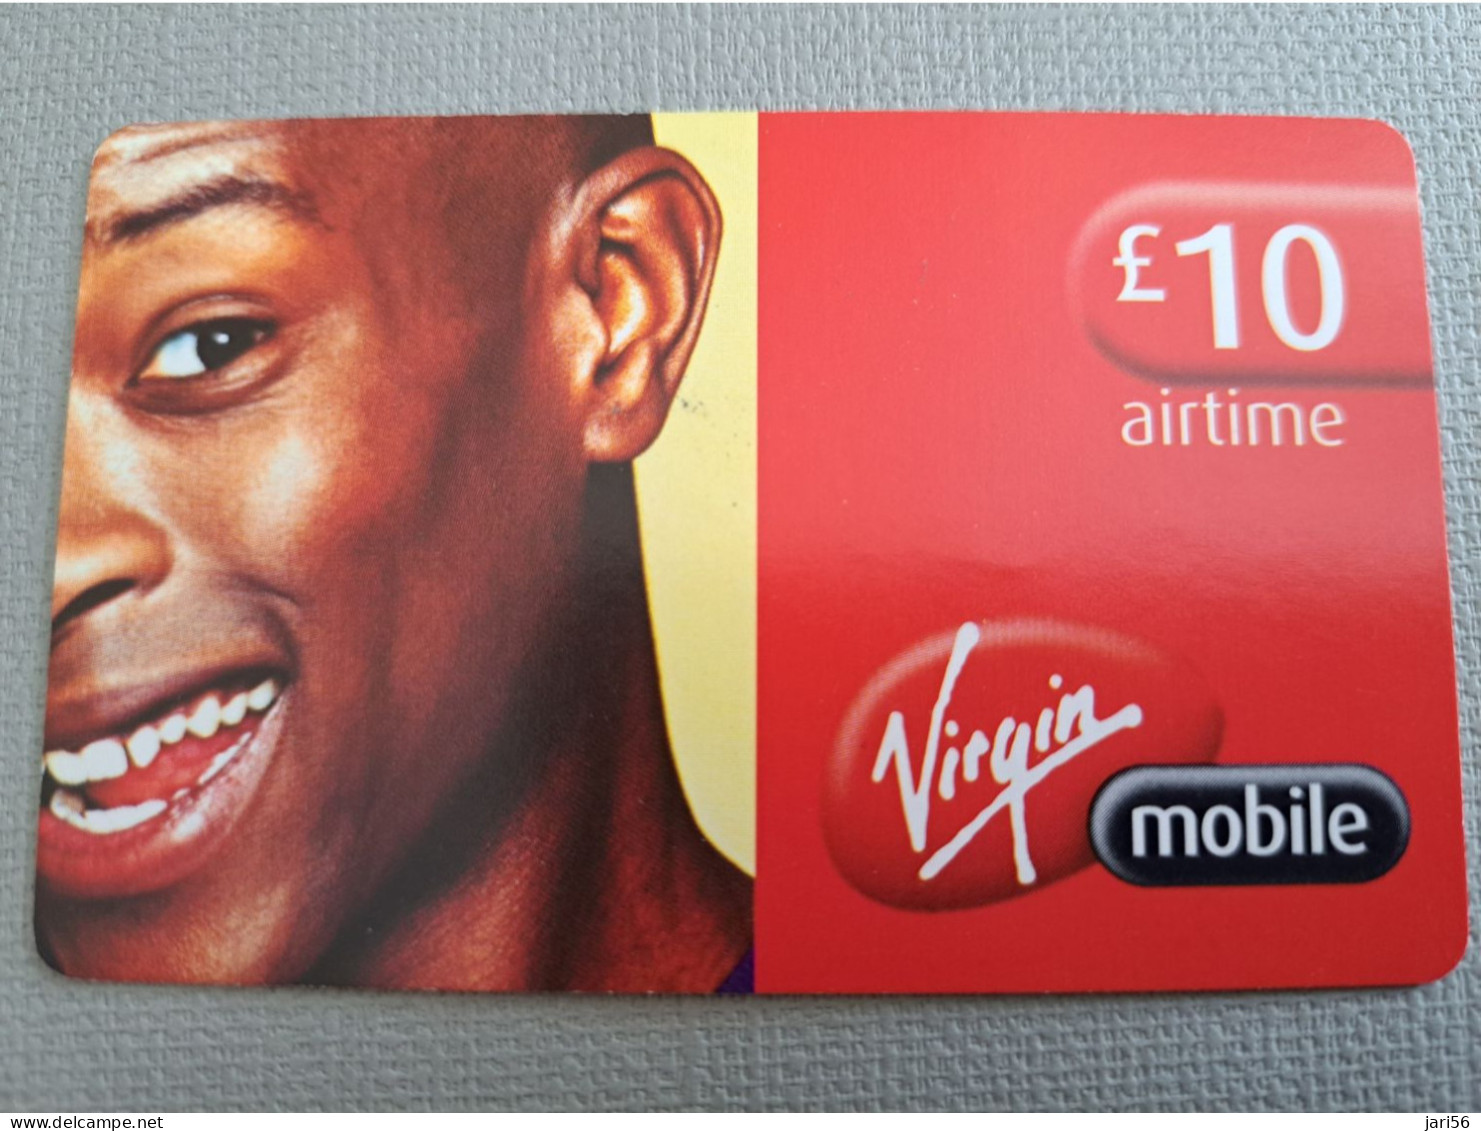 GREAT BRITAIN / 10 POUND  /PREPAID / VIRGIN MOBILE //FACE  PEOPLE ON CARD / FINE USED    **15066** - Verzamelingen